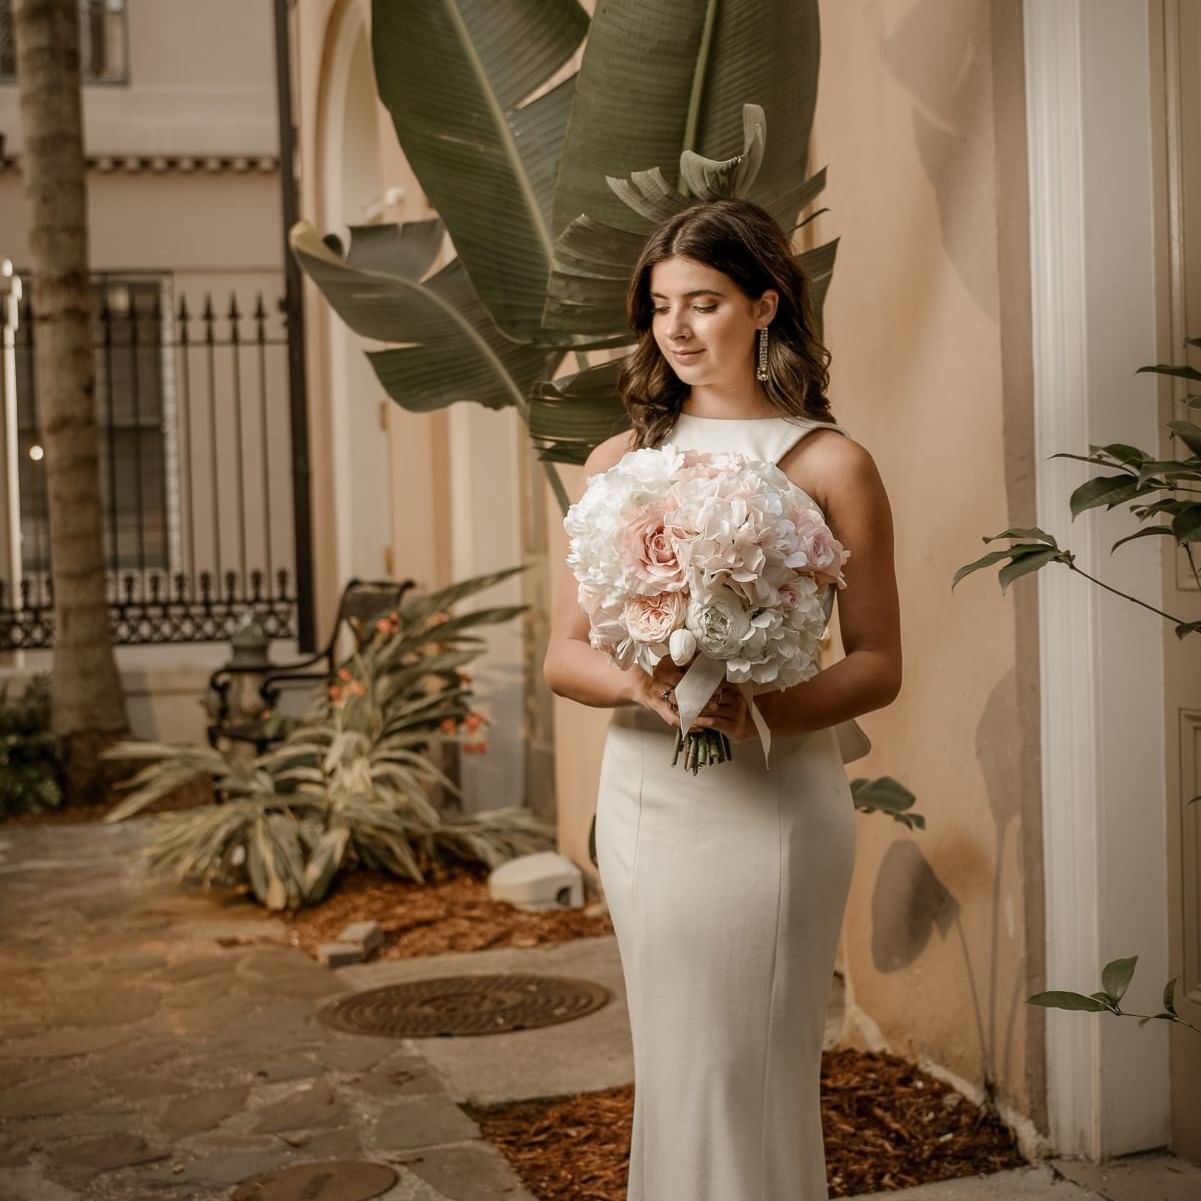 A bride posing for a photo at St. James Hotel